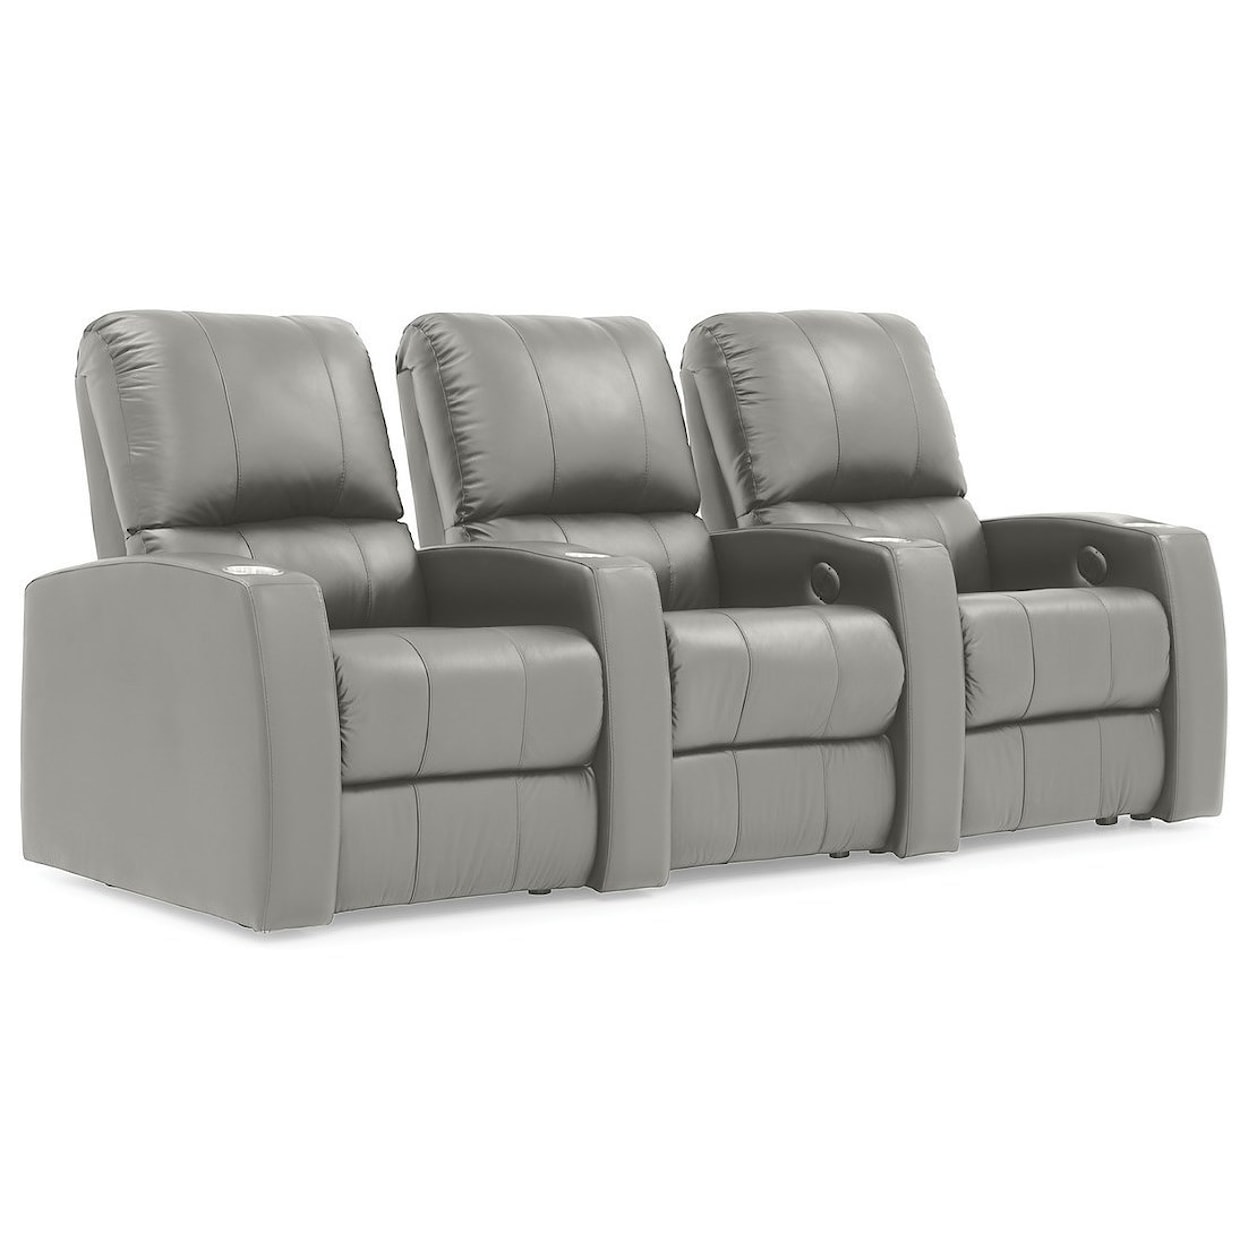 Palliser Pacifico 41920 3-Seat Reclining Theater Seating